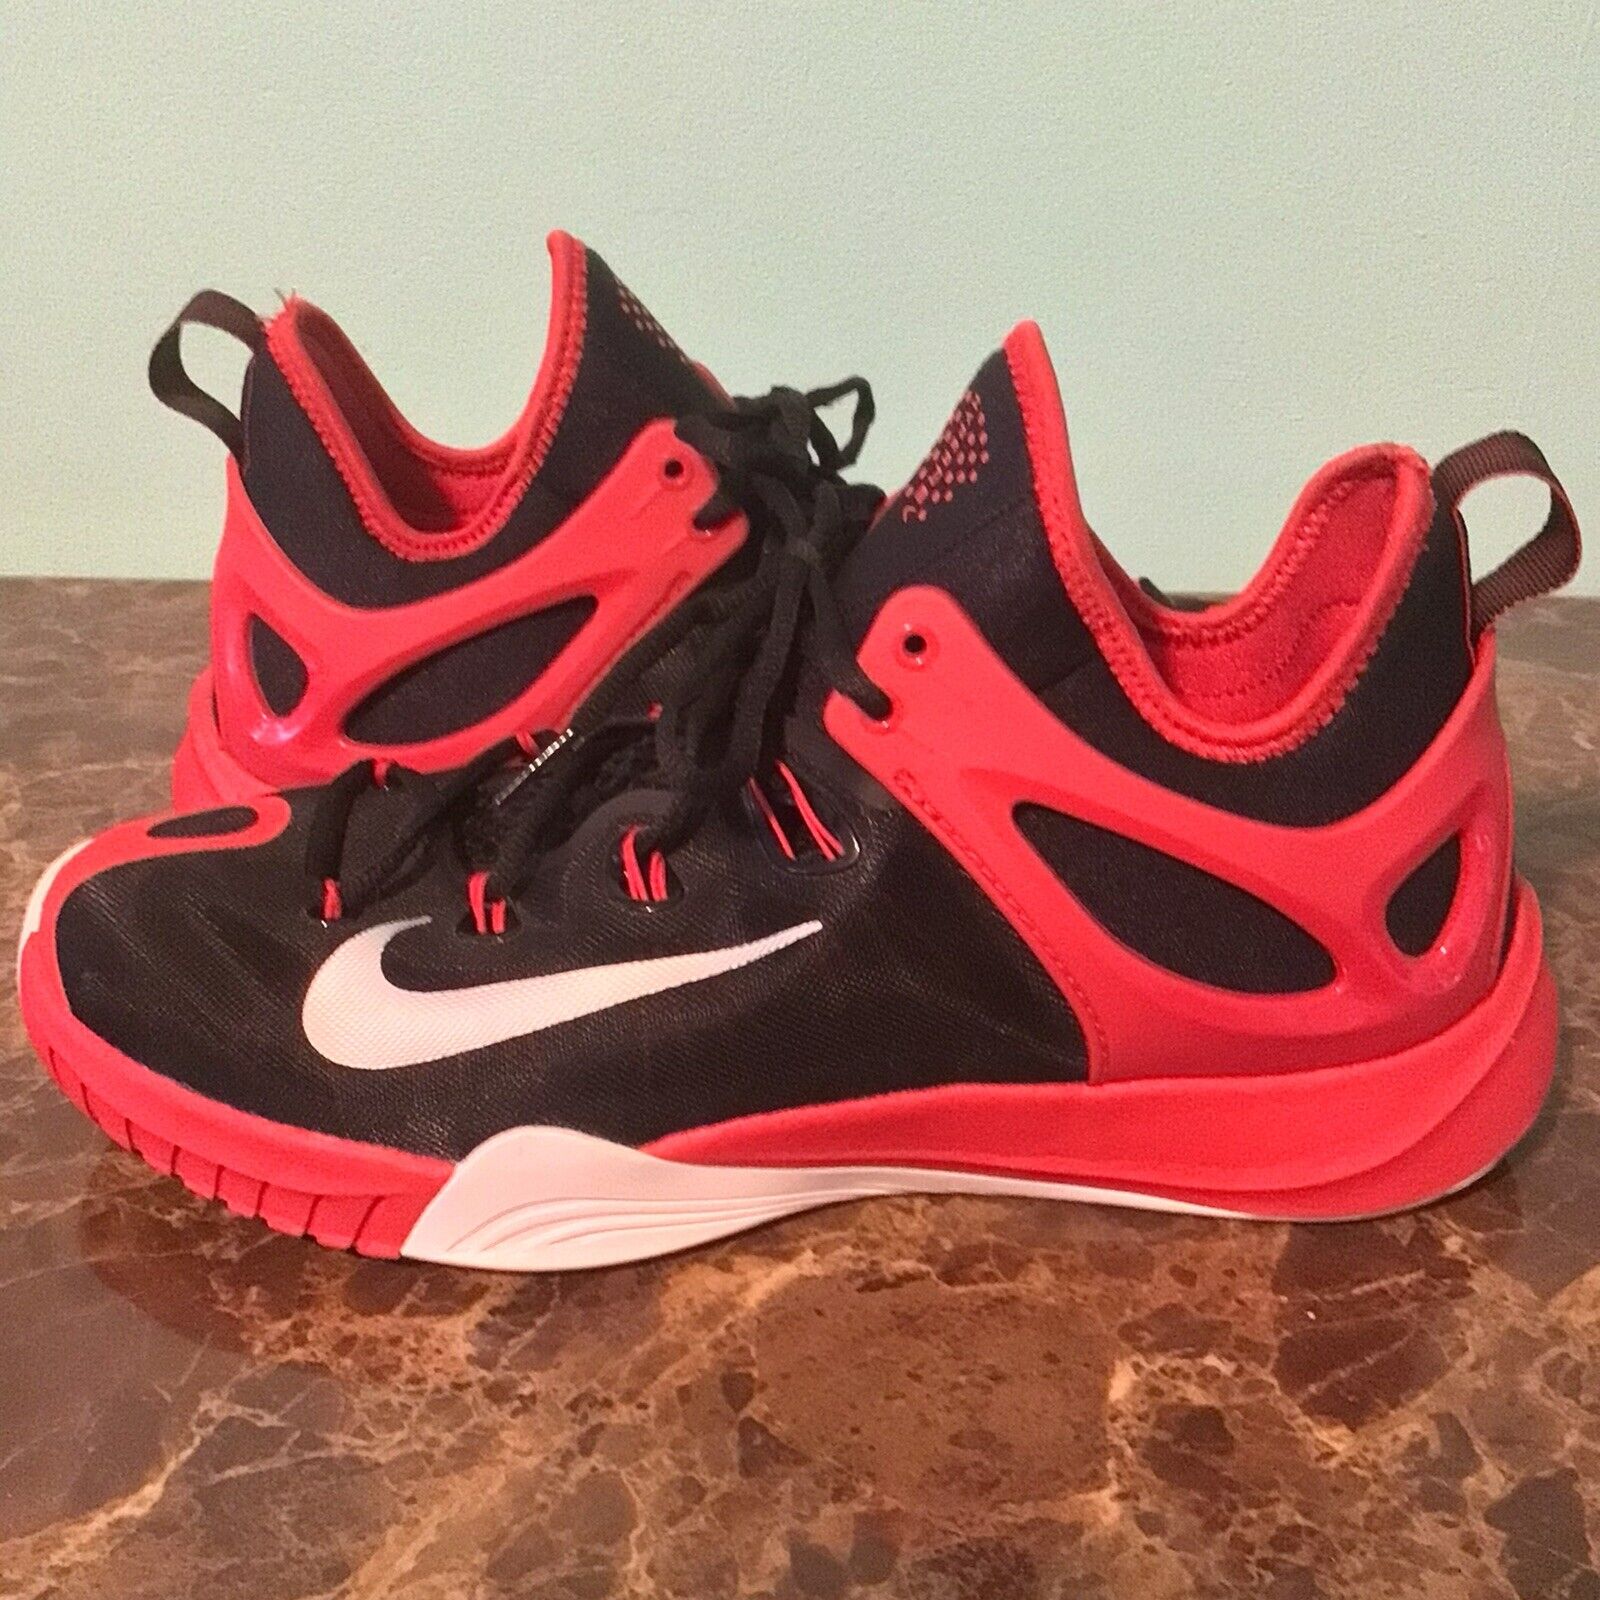 Greet Gym Inaccessible Size 10.5 - 705370-006 Nike Zoom HyperRev Men&#039;s Basketball Black/Red |  eBay